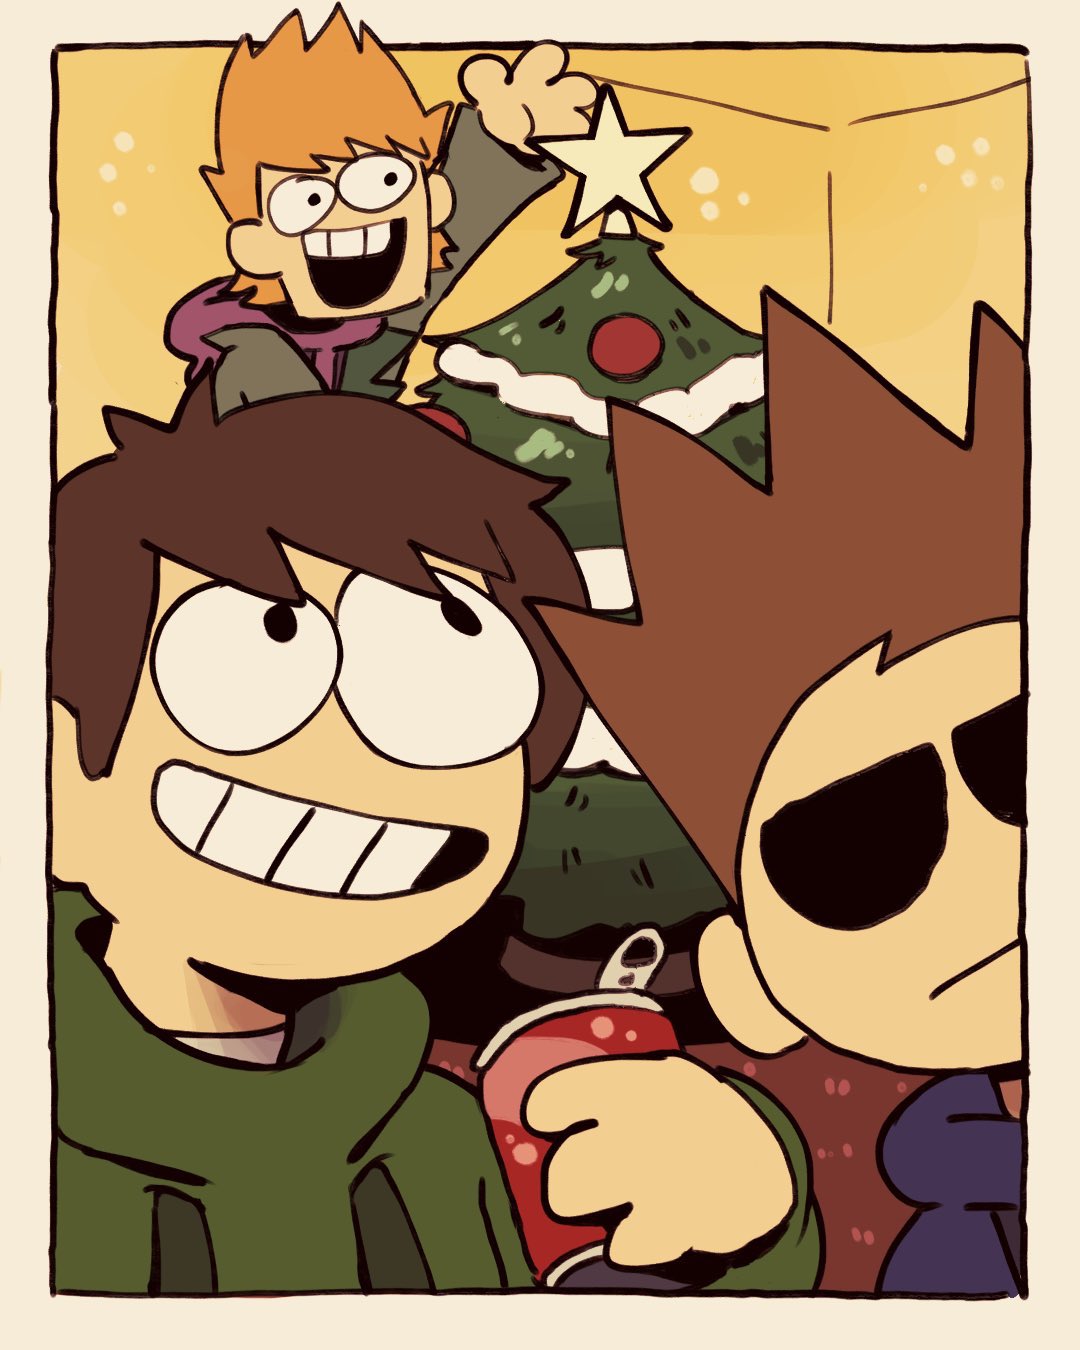 Daily Eddmatt on X: On 6/18/21 the official Eddsworld account posted this  drawing which shows Matt carrying Edd,and Tom carrying Matt,but it also  shows Matt smiling at Edd while he holds a